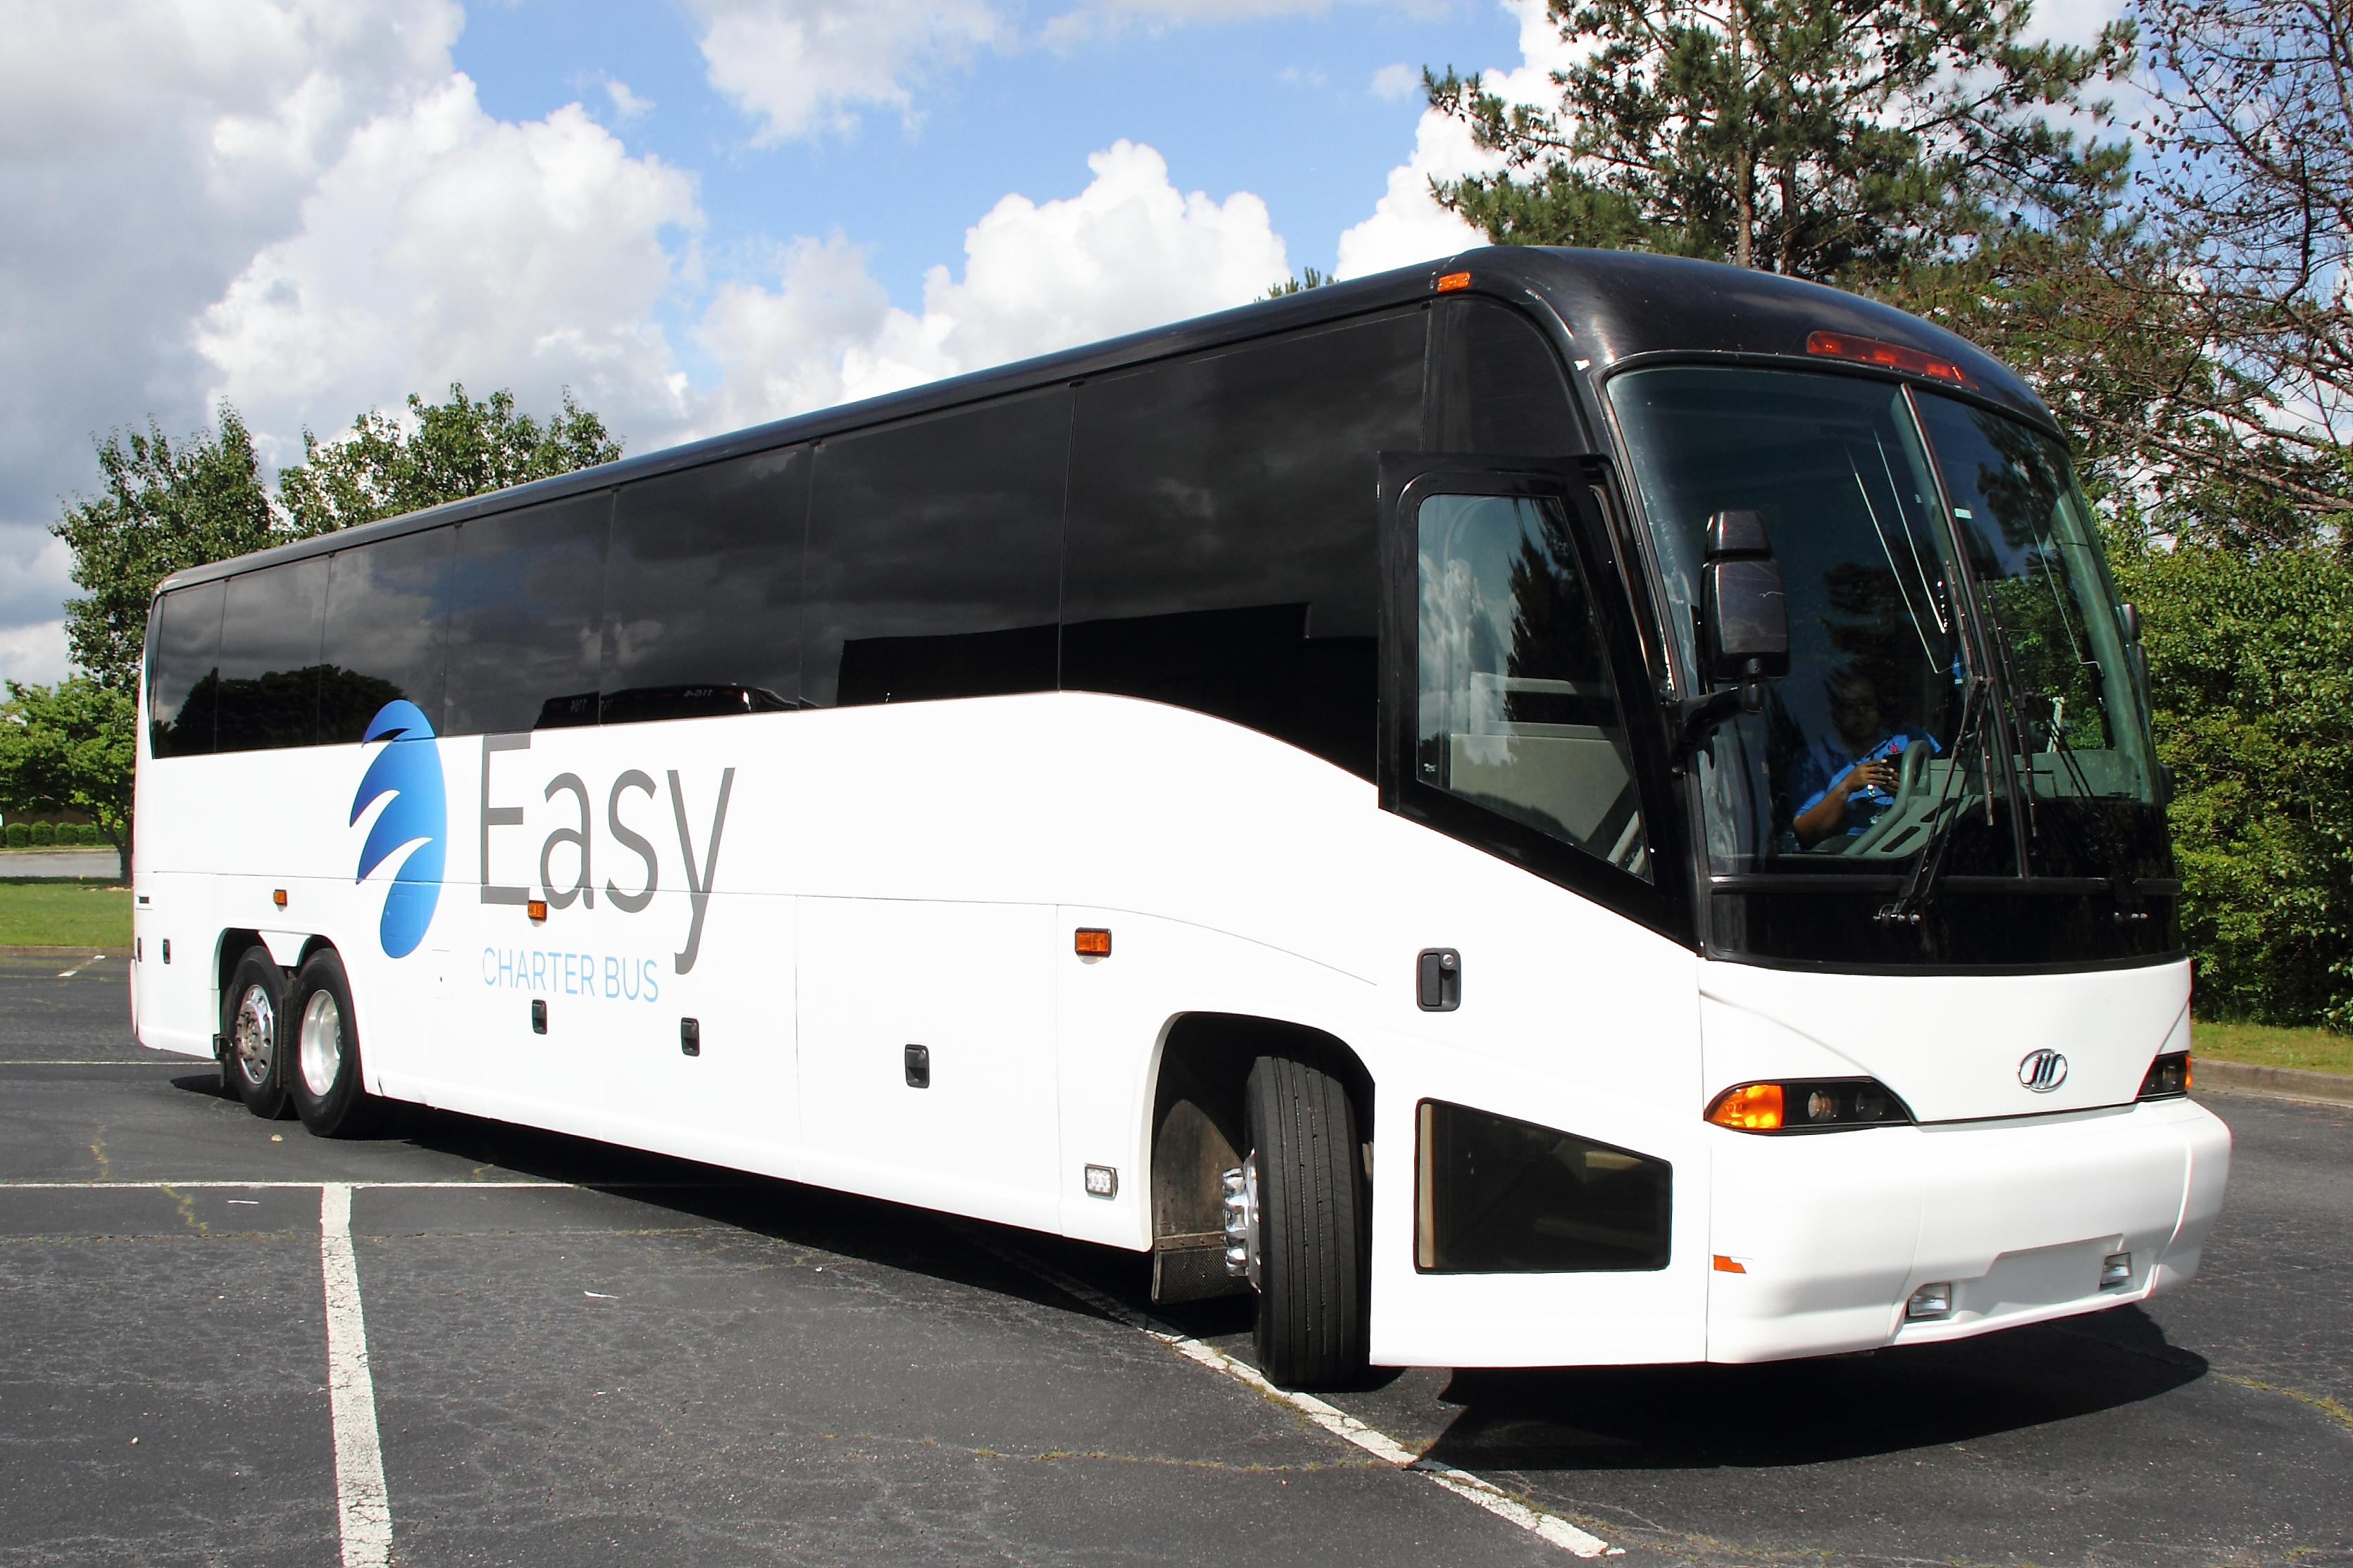 Easy Charter Bus Offers Private Group Transportation